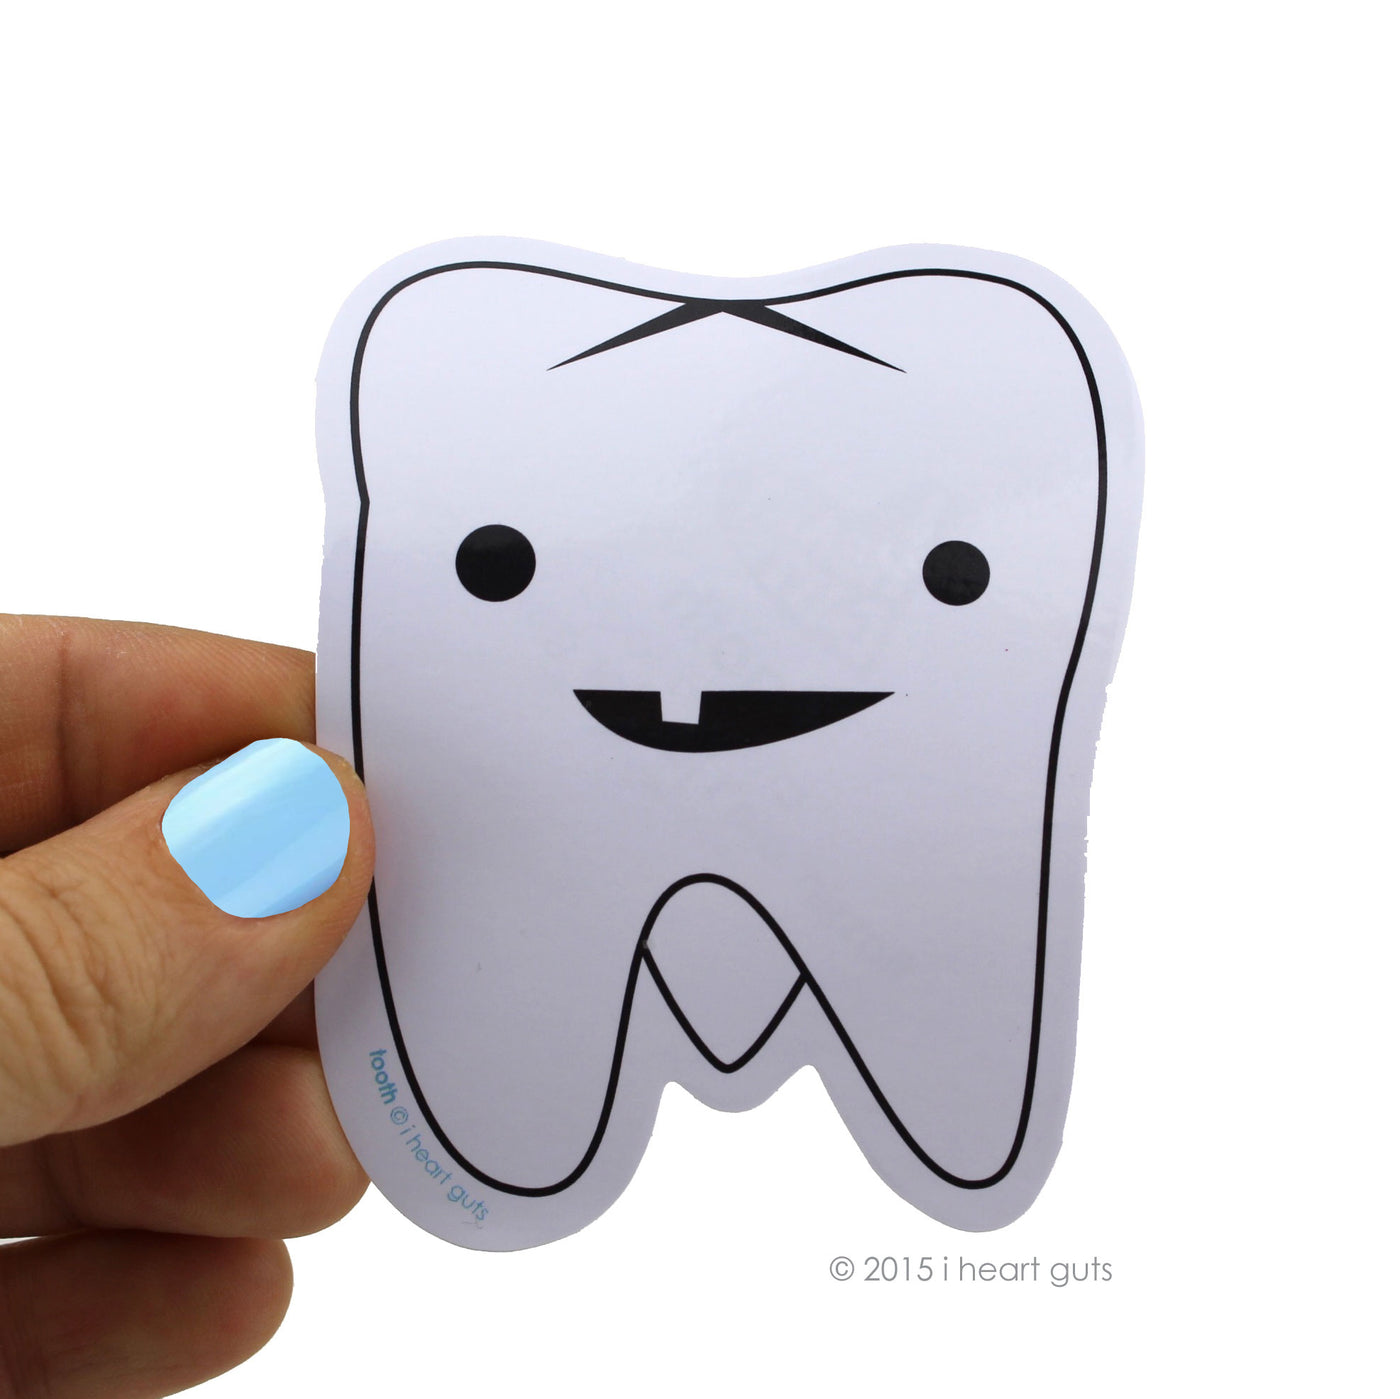 Tooth Stickers - Cute Teeth Stickers Dental Giveaways - Funny Bulk Dentist Office